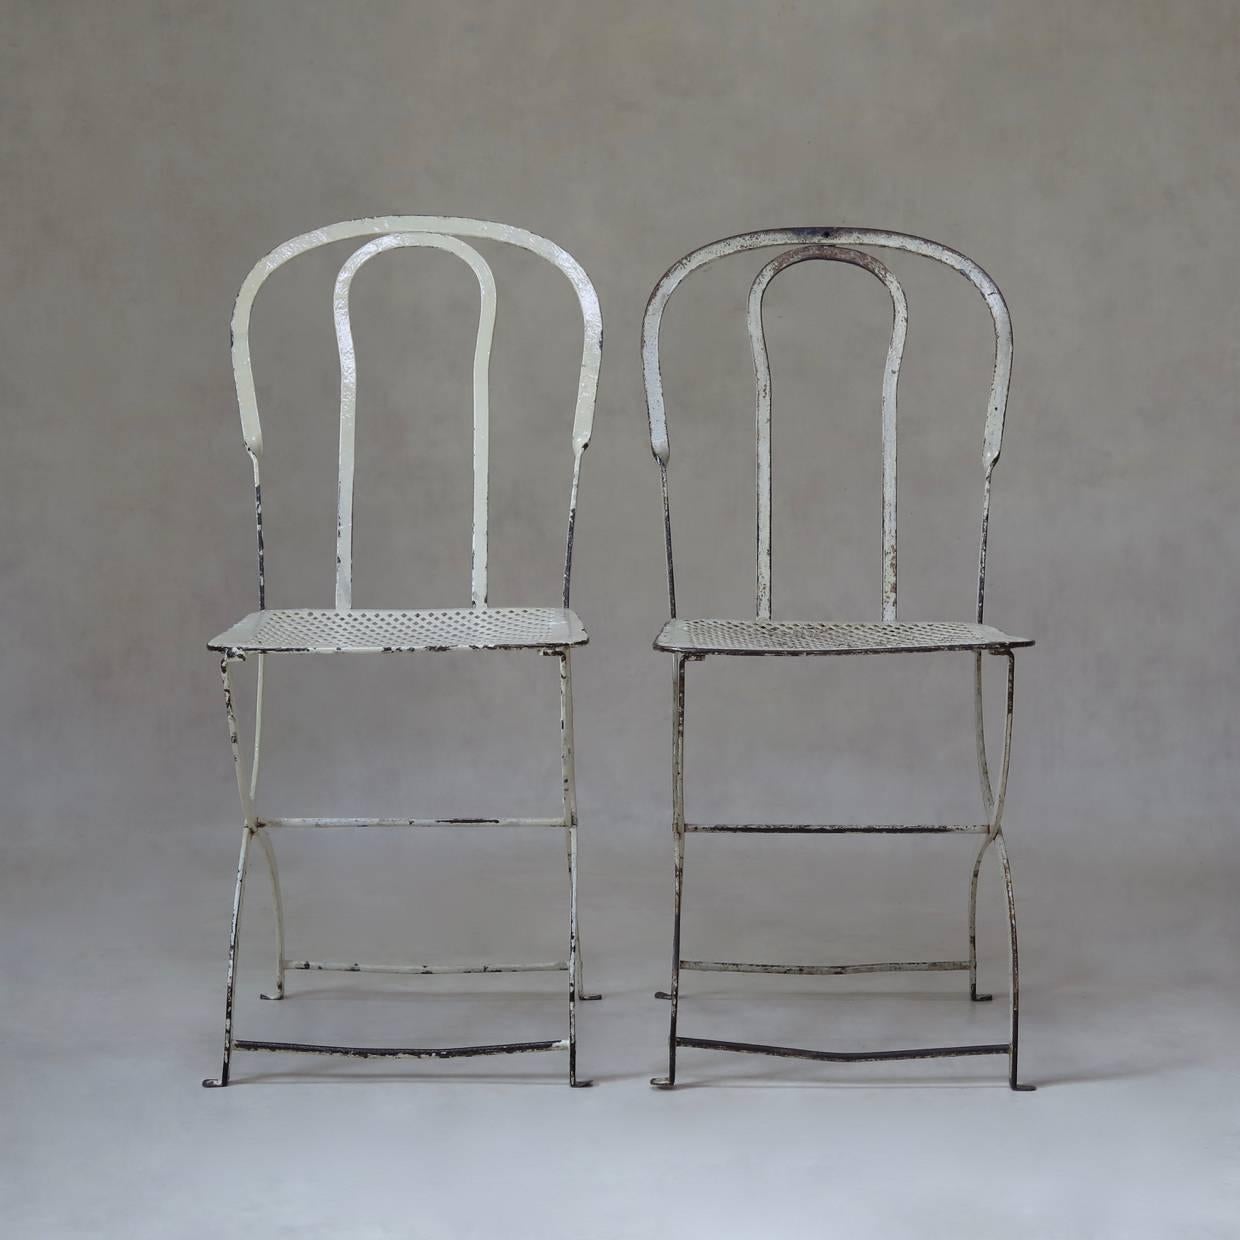 This garden chair is a Classic of French chic, understated style and quality. Made of iron, with original white paint.